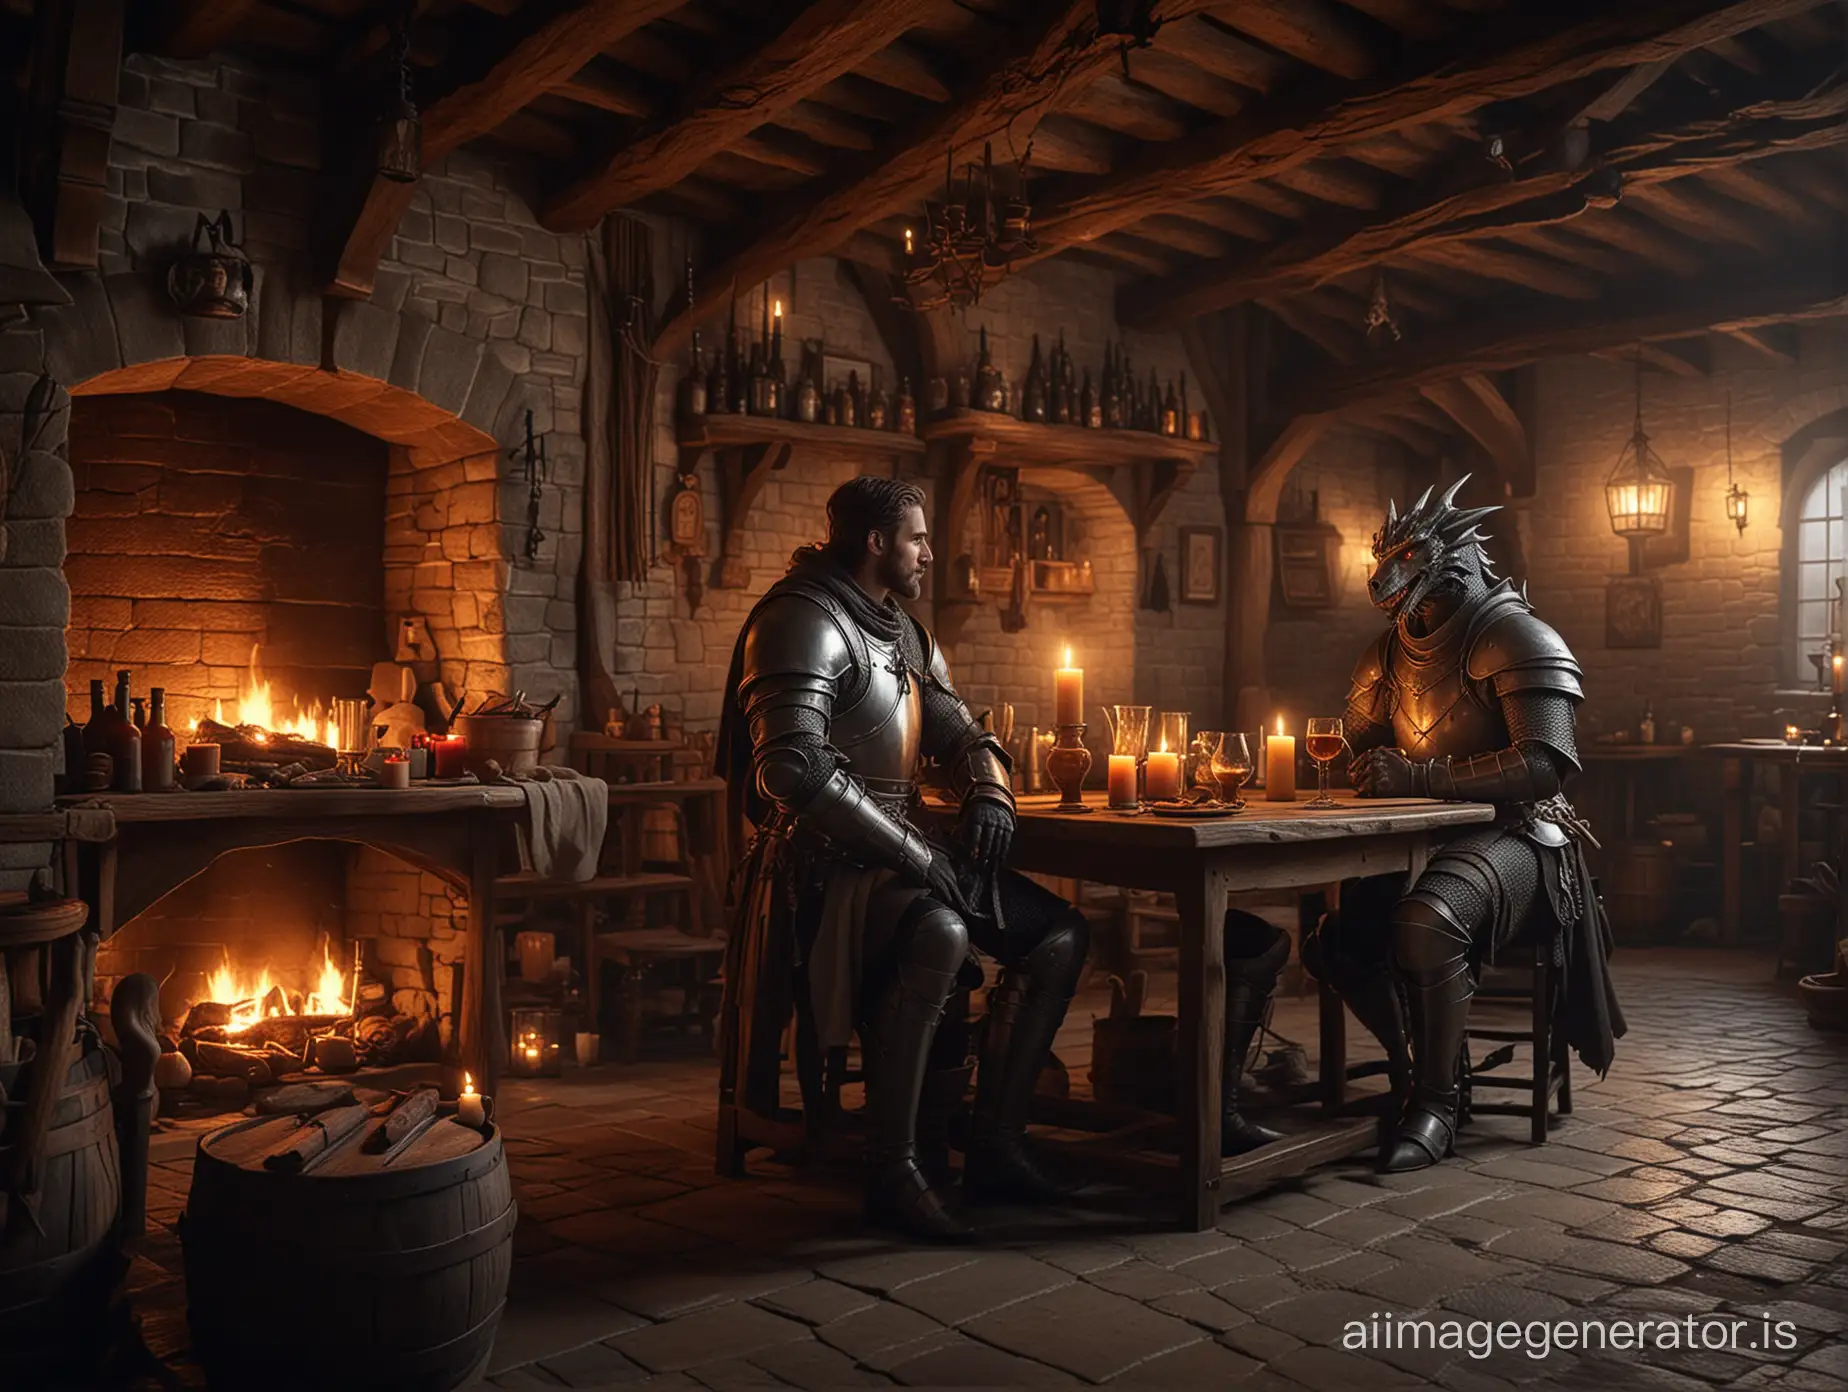 A scene of tranquility and peace in a medieval tavern at night. A knight and a dragon sit together, enjoying ale. The room is illuminated by the soft glow of candles and a crackling fireplace. Detailed fashion photography, capturing the warmth and coziness of the scene, 4K resolution, wide angle shot, dramatic lighting, magical ambiance, highly detailed.